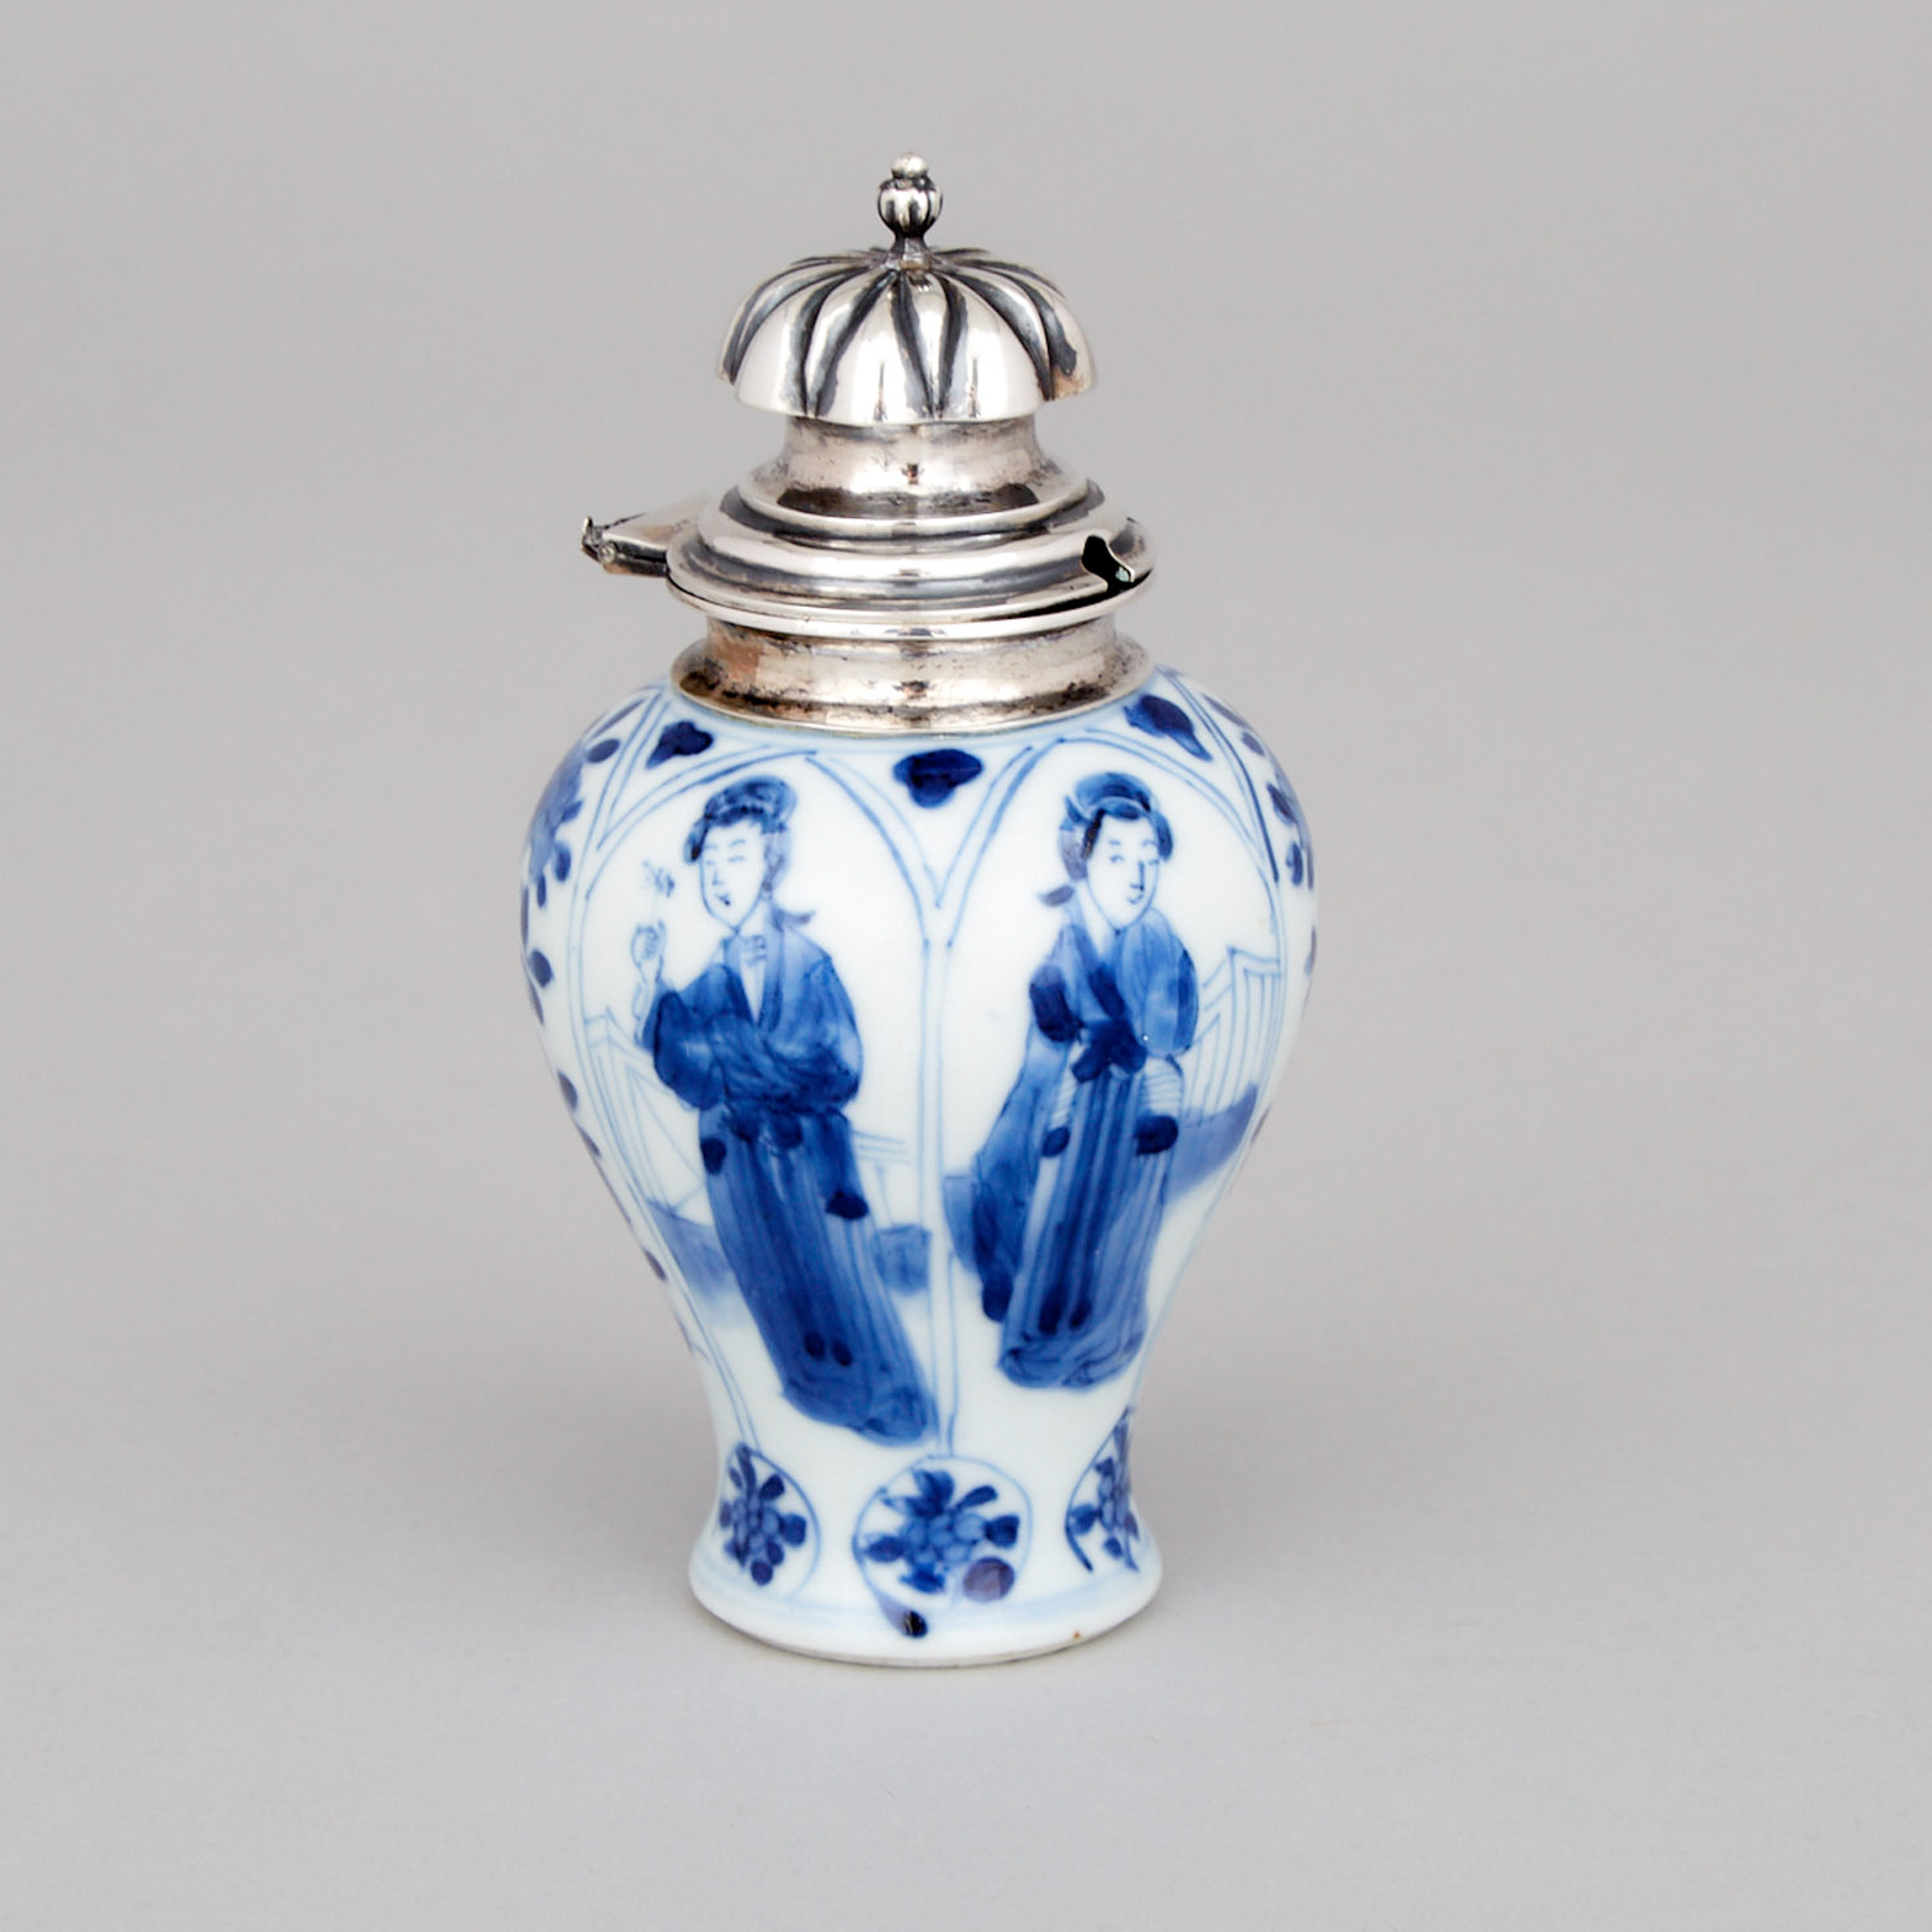 Dutch Silver Mounted Chinese Export Blue and White Porcelain Mustard Pot, 1850